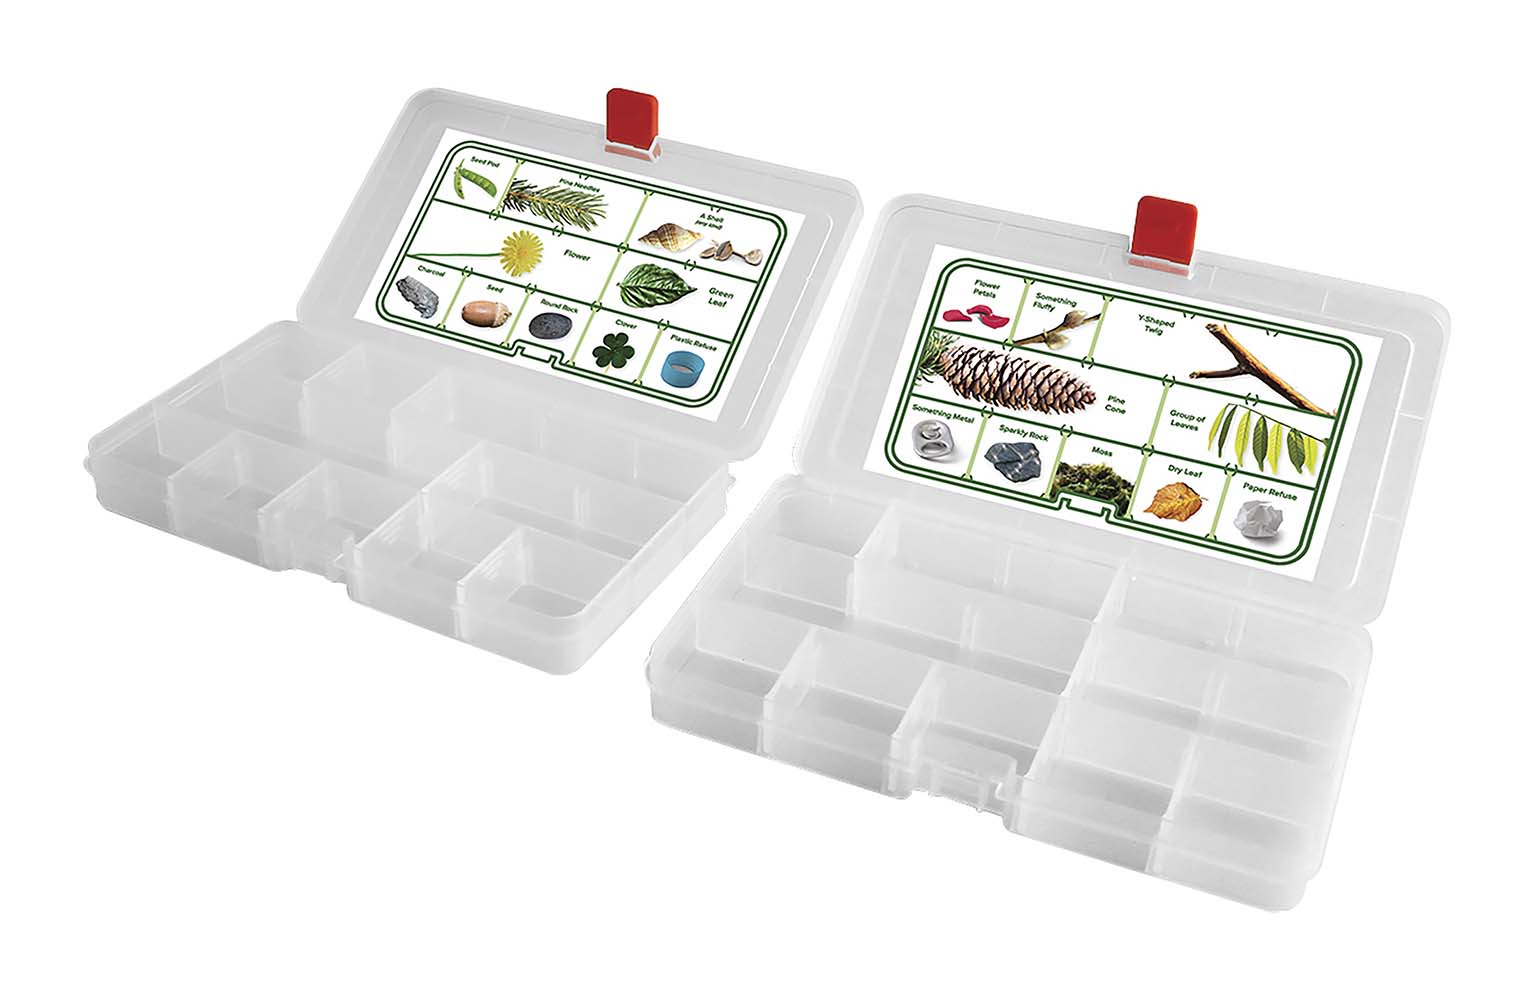 7692170 A treasure hunt kit for children. Contains 2 different storage boxes with 2 game cards. Not suitable for children under 3 years. Ideal for searching for leaves, branches, stones etc.